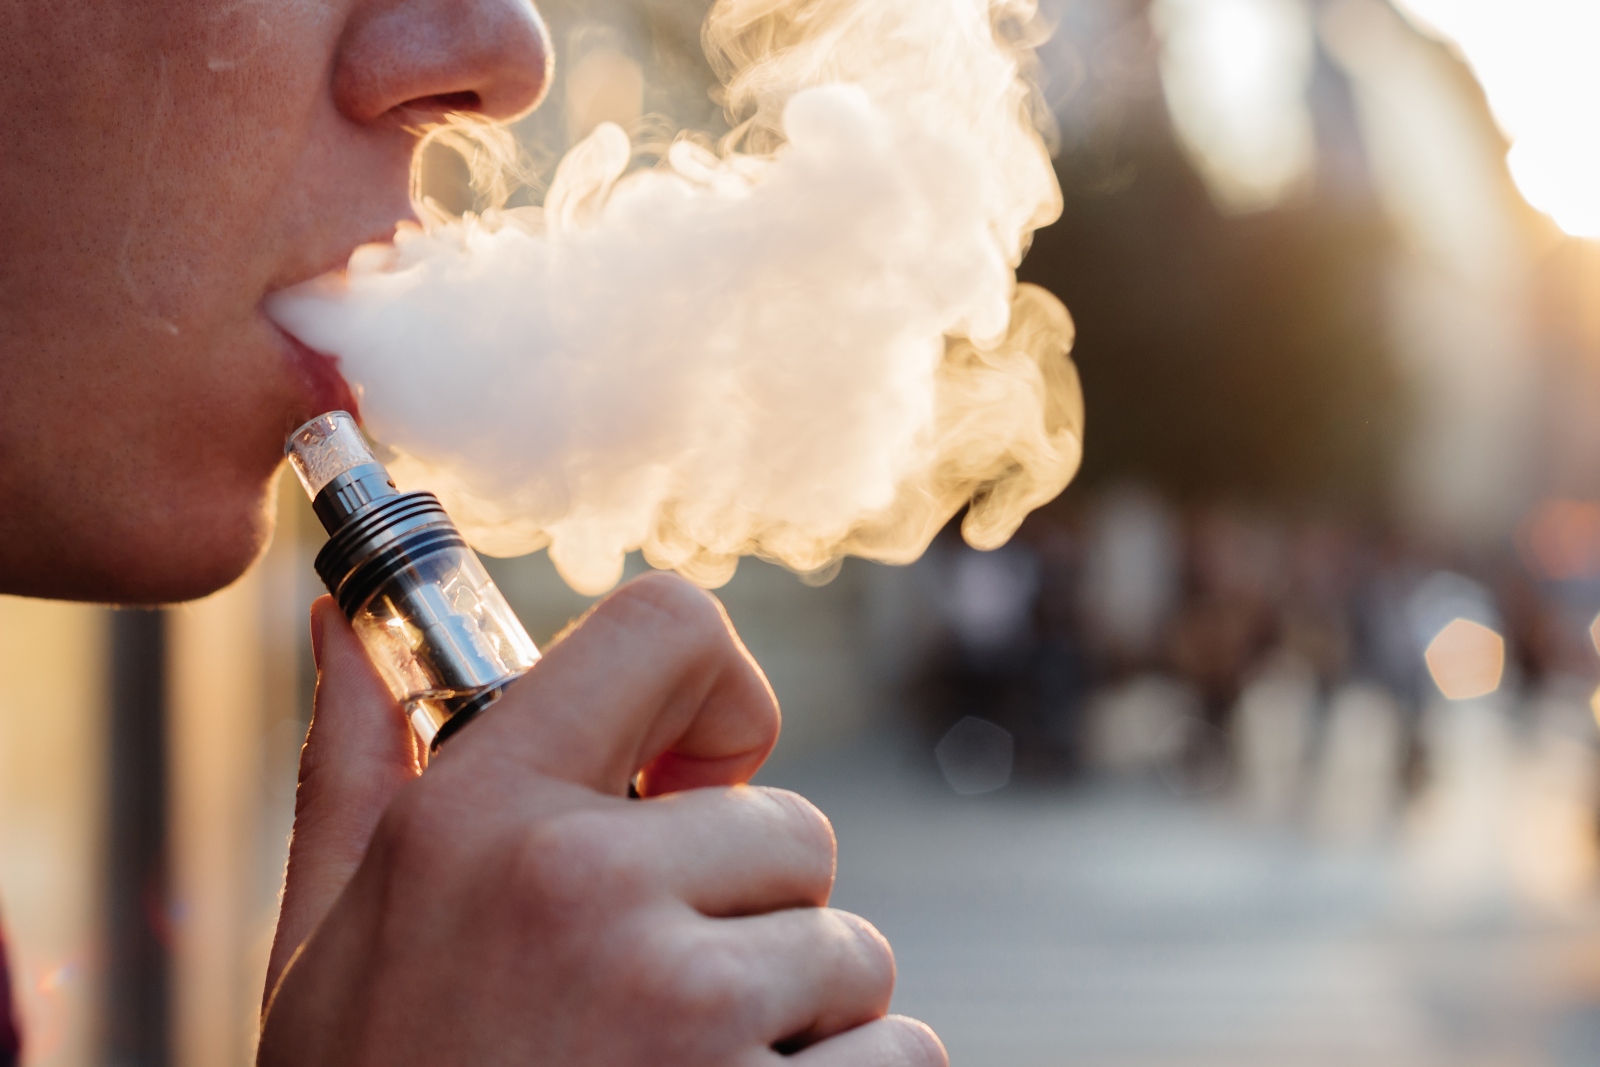 Daily Vaping Dramatically Ups Quit Rate in Heavy Smokers Not Aiming to Quit  | Roswell Park Comprehensive Cancer Center - Buffalo, NY